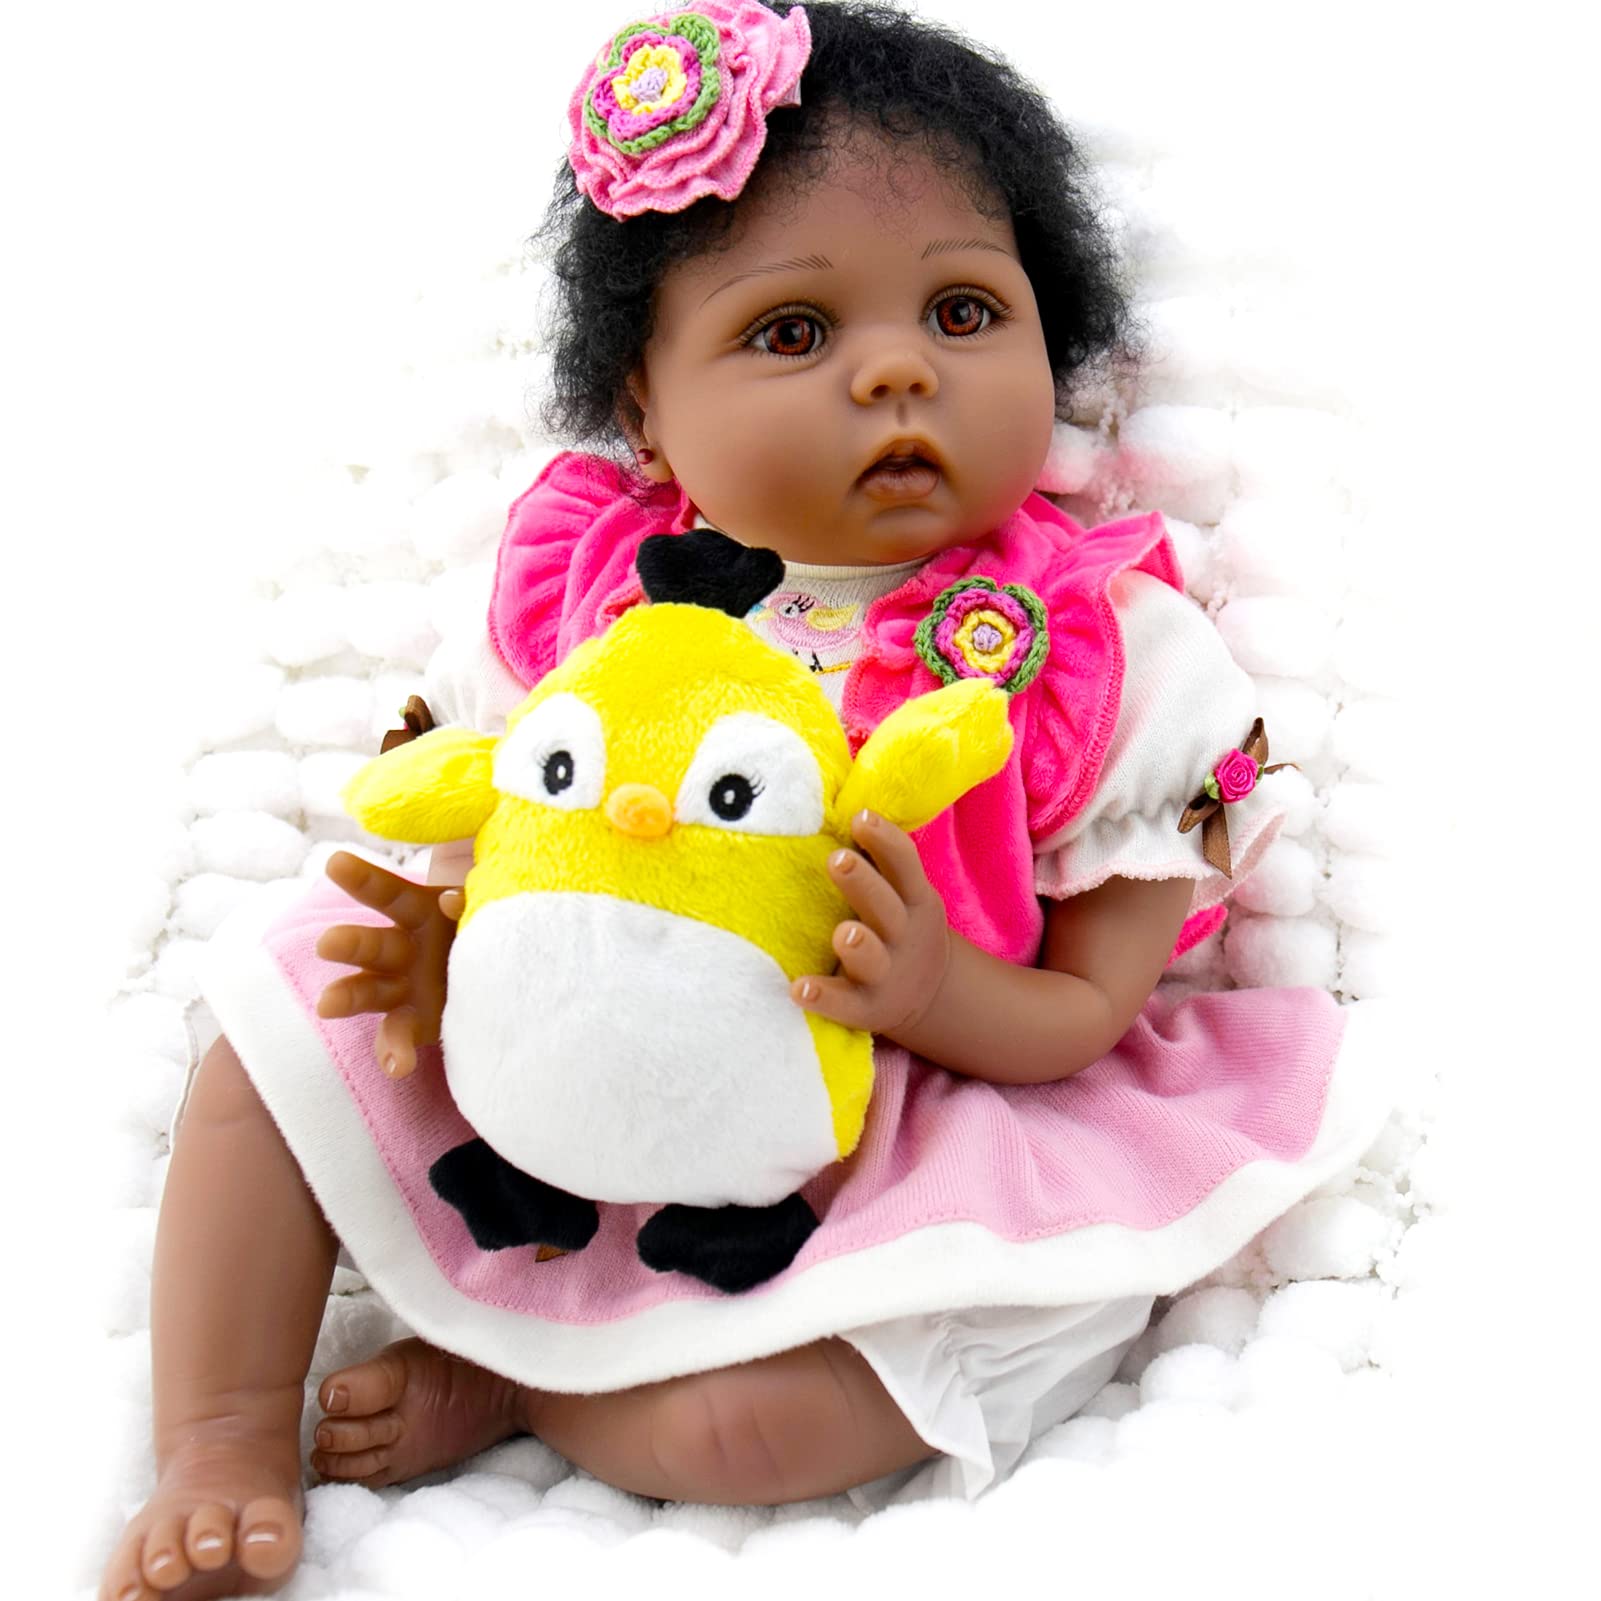 Aori Reborn Baby Dolls Black 22 Inch Realistic African American Newborn Girl Weighted Reborn Baby with Sunny Bird Gift Accessories